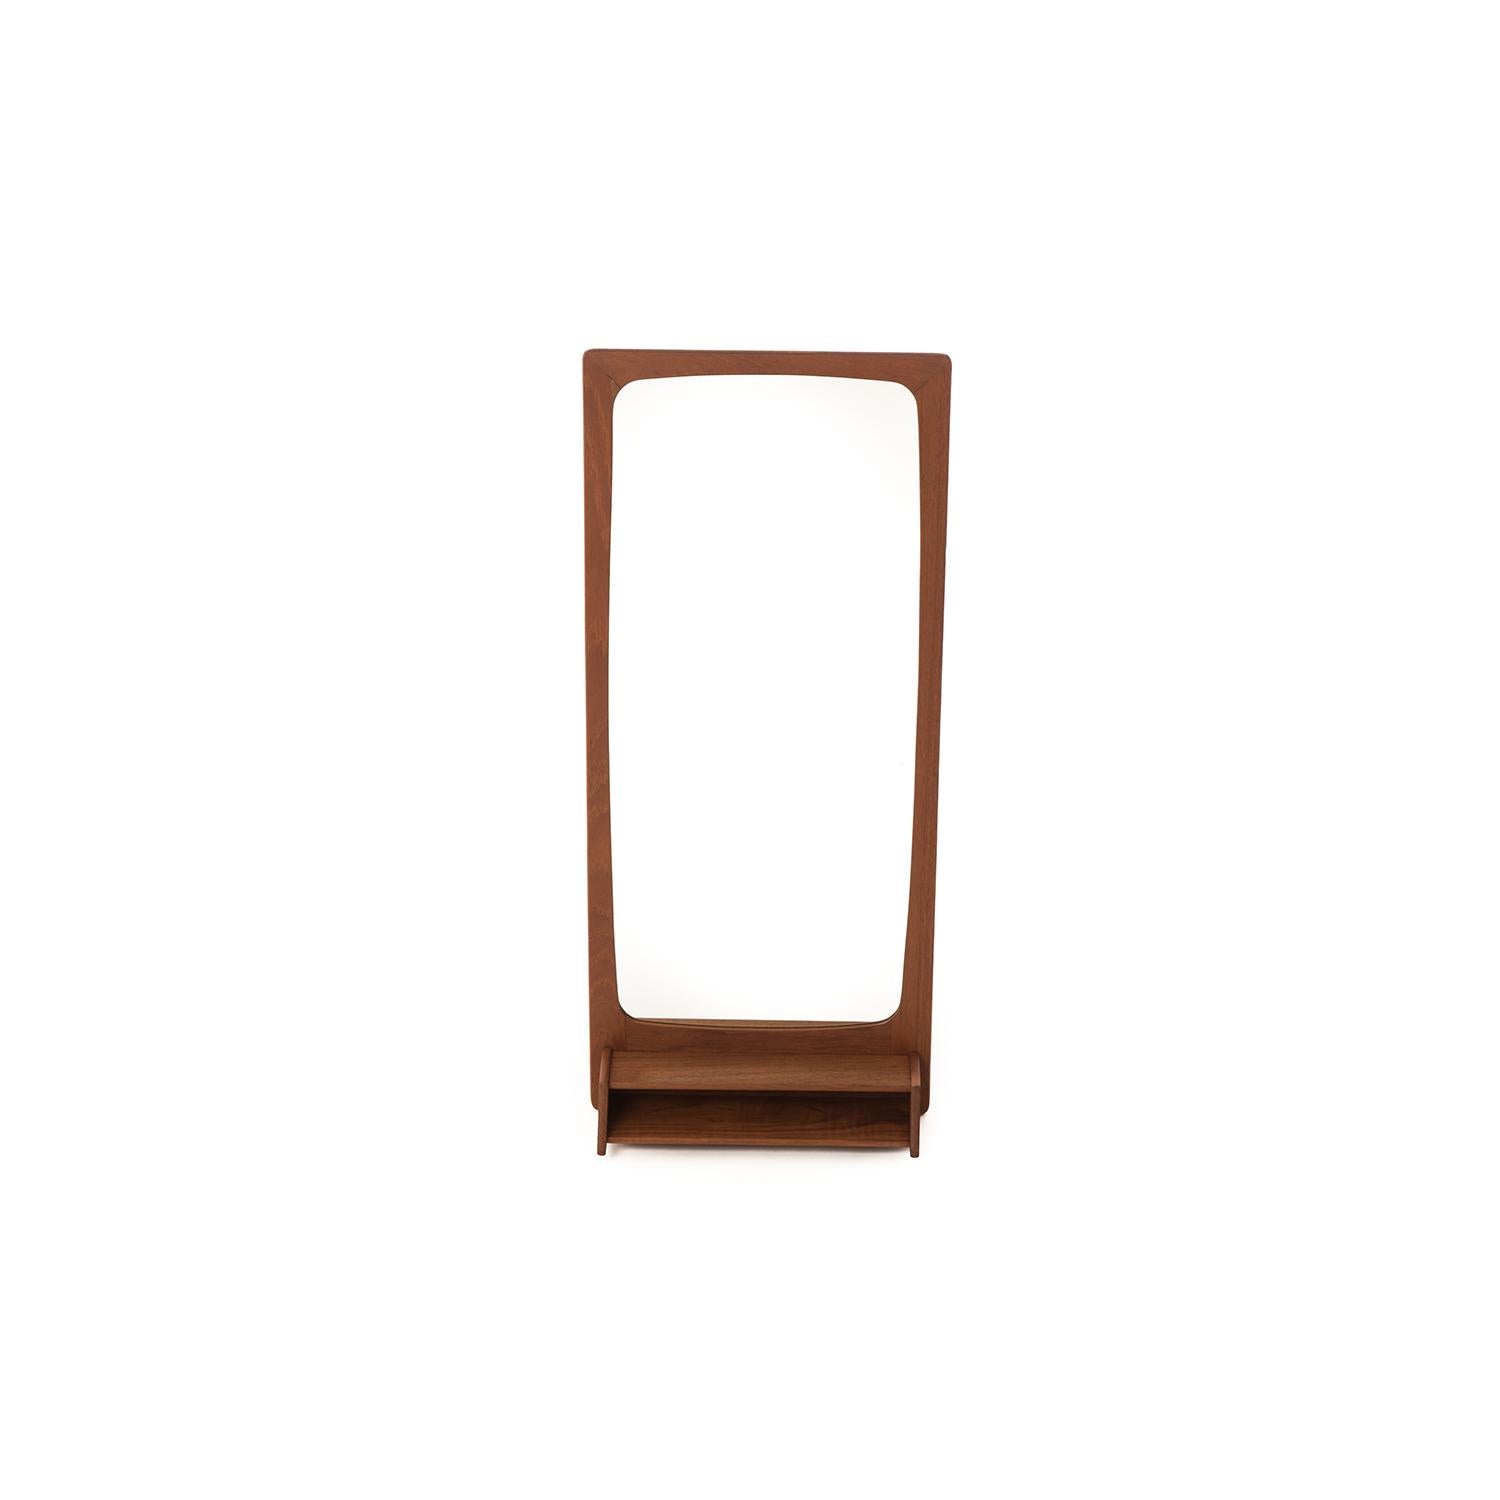 The built in shelf makes this Danish modern teak mirror Stand out from the rest. Perfect spot for your keys, lipstick or business cards. A great piece for coming and going areas of your home.